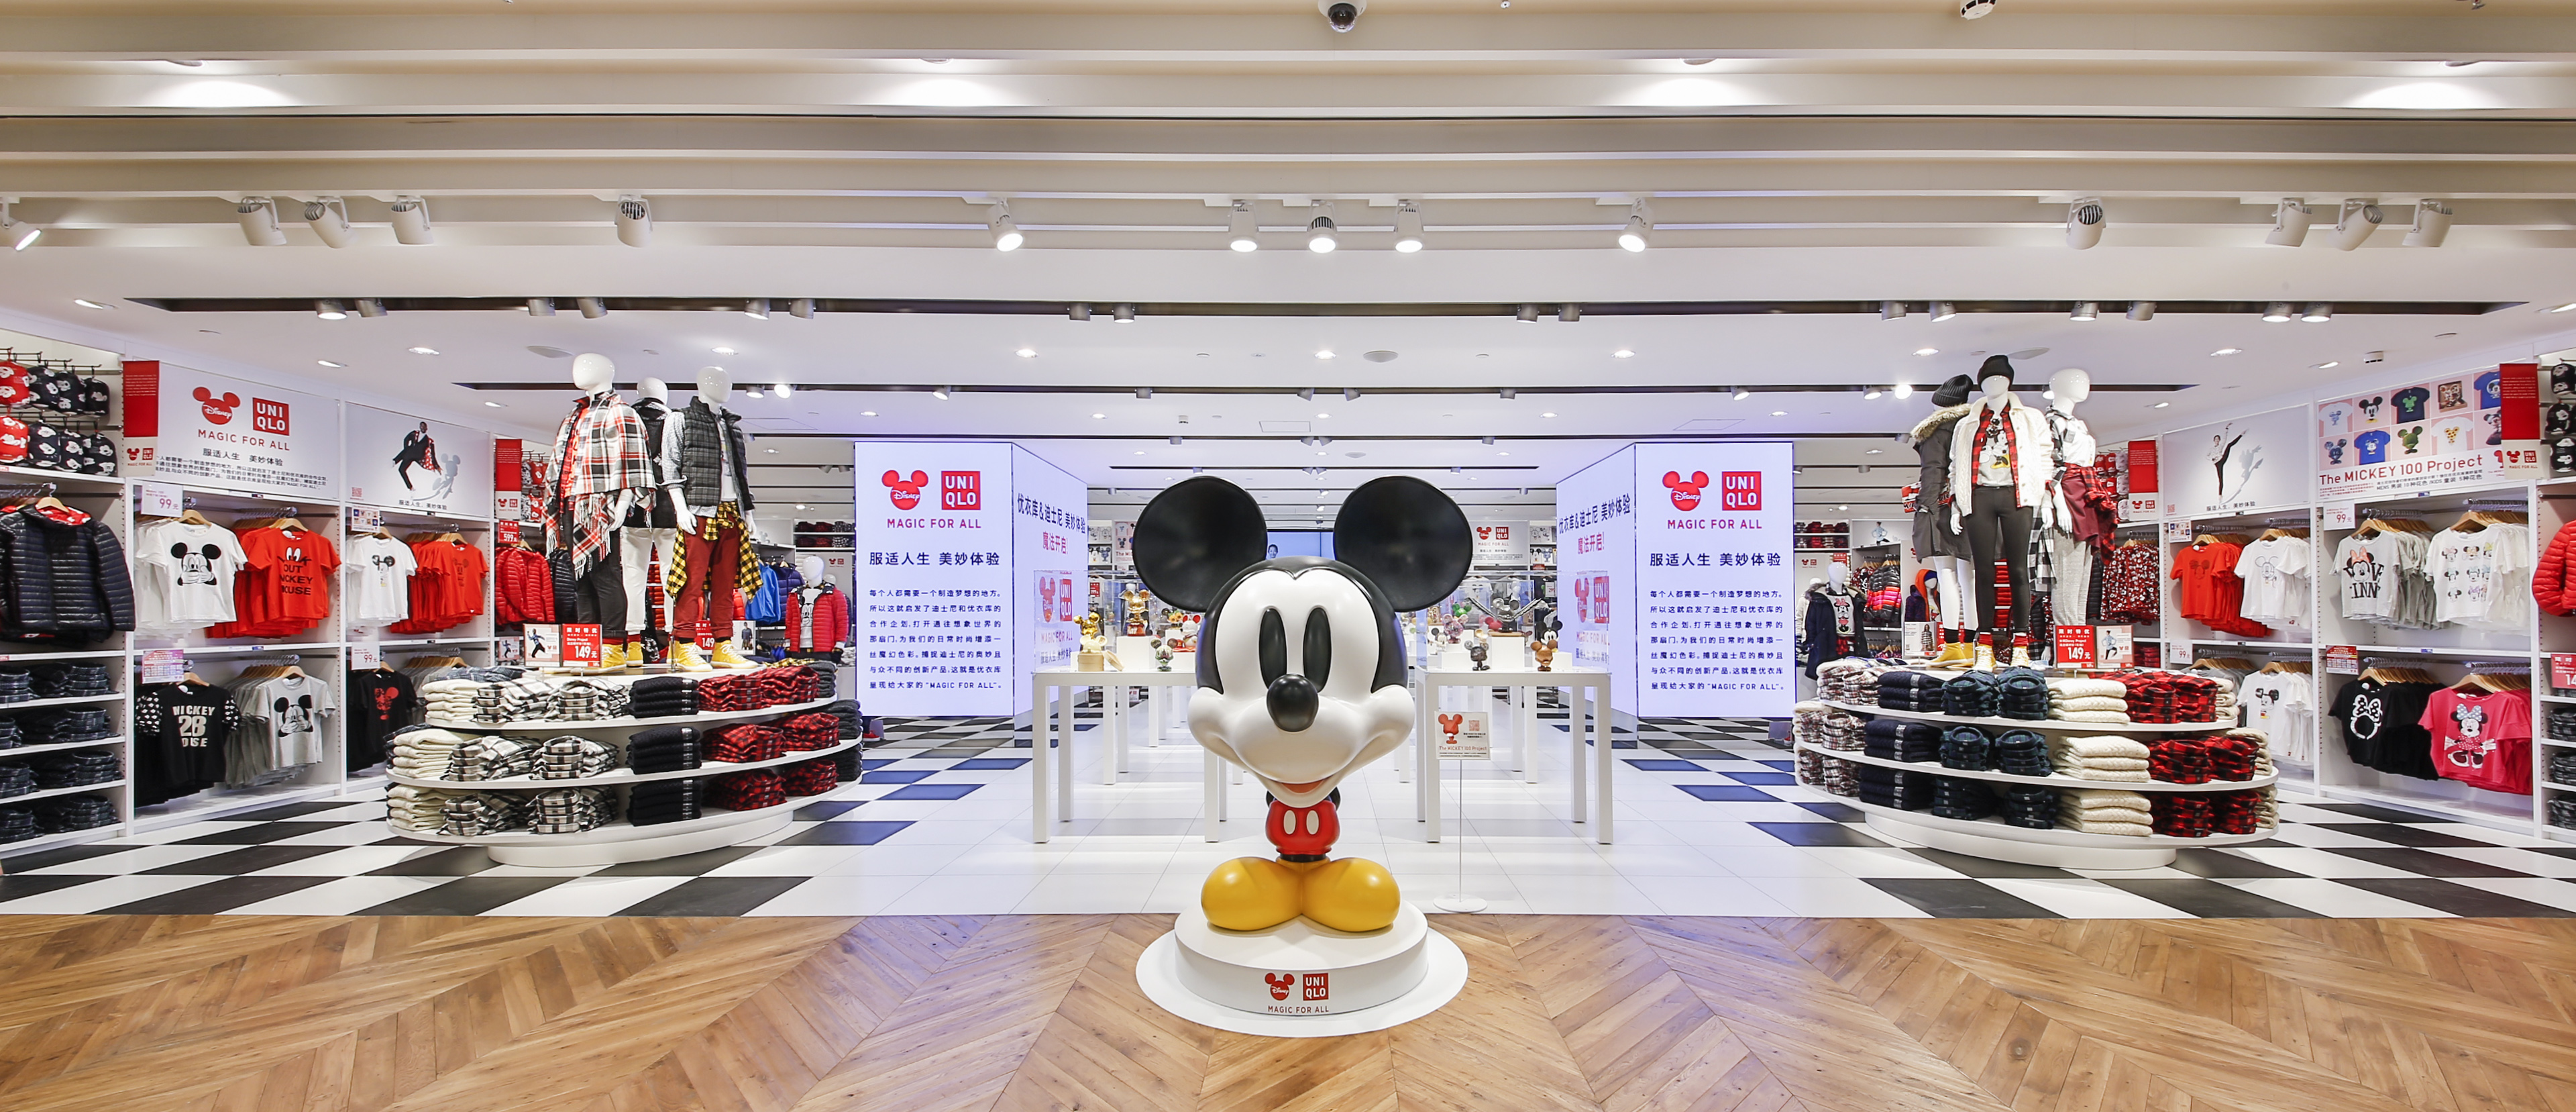 Magicforall Dreams Come True At Uniqlo S Global Flagship Store In Shanghai Hype Malaysia